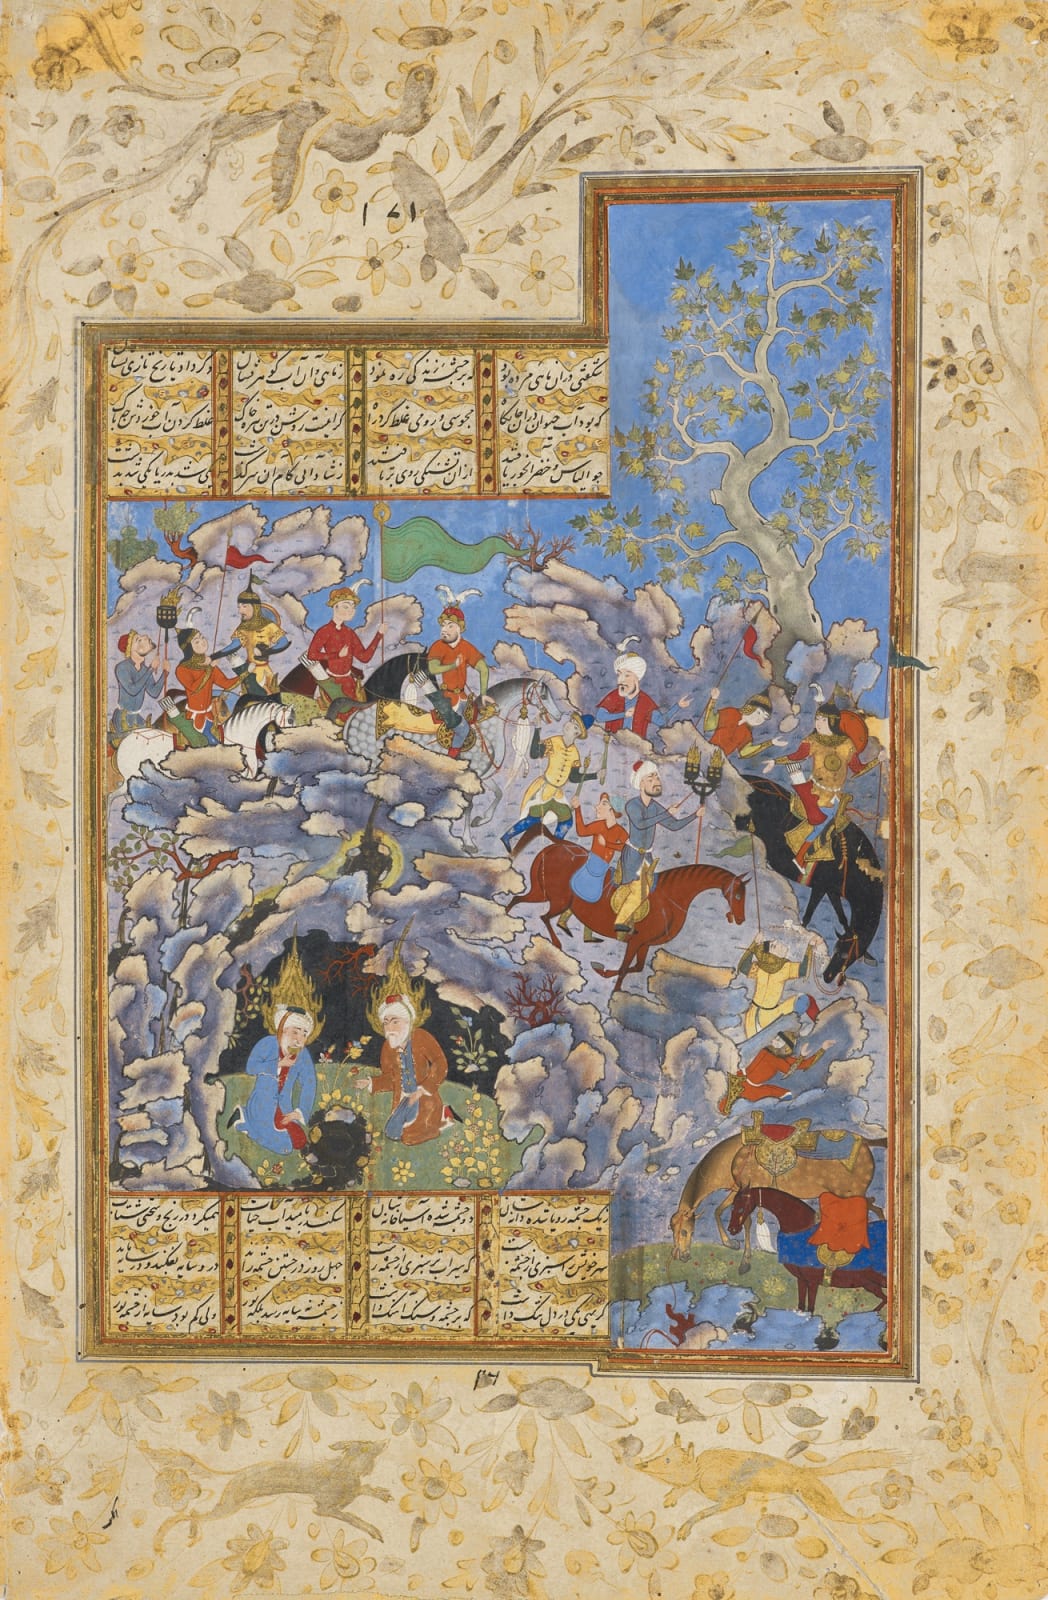 Khizr and Ilyas drink from the Well of Life while Iskandar roams the Mountainside, from Firdawsi’s Shahnama, Iran, Shiraz, c. 1580–85